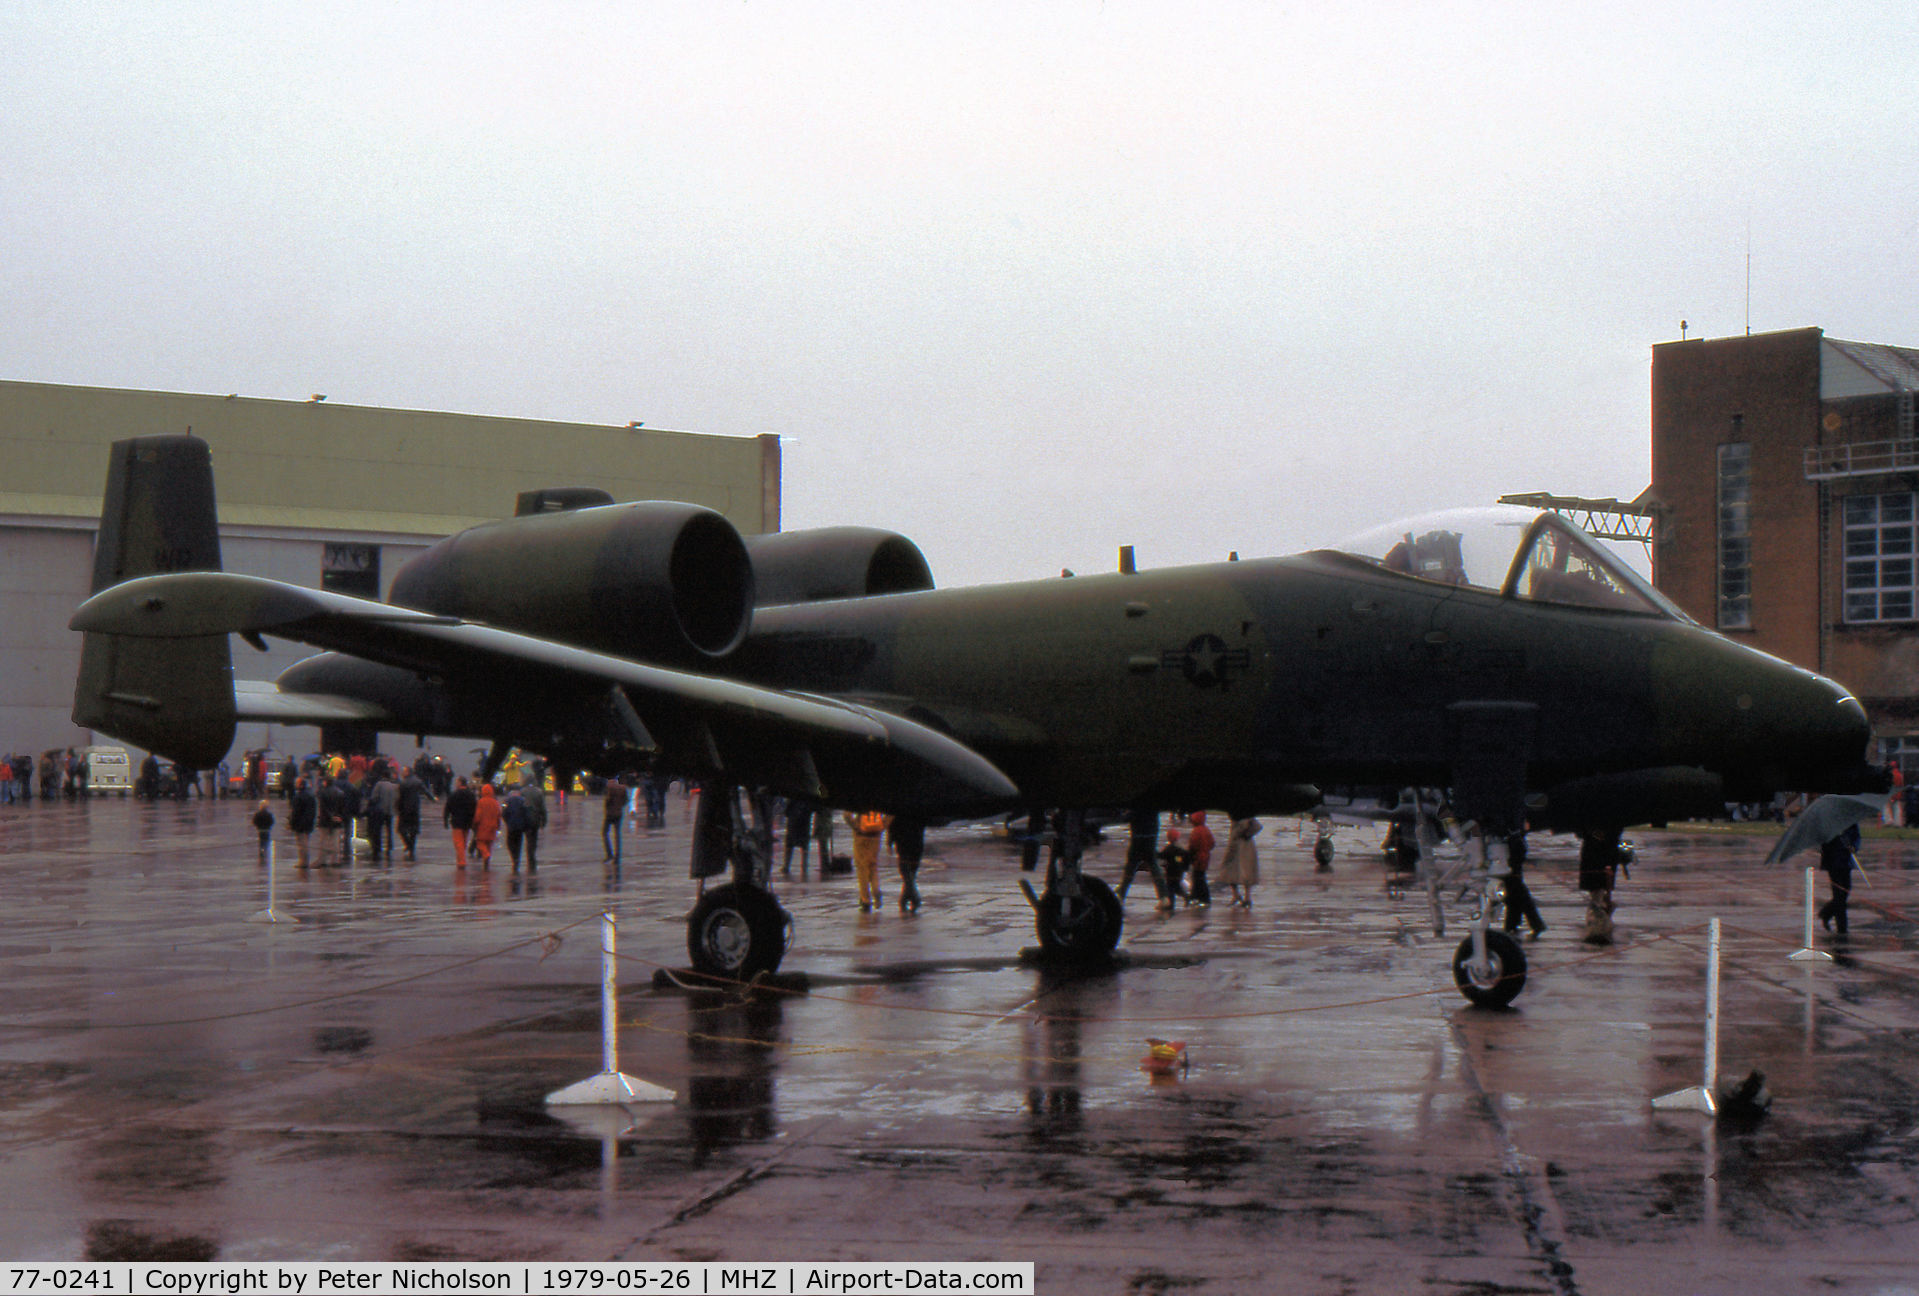 77-0241, 1977 Fairchild Republic A-10A Thunderbolt II C/N A10-0166, Another view of this 81st Tactical Fighter Wing A-10A Thunderbolt II on display at the 1979 RAF Mildenhall Air Fete.